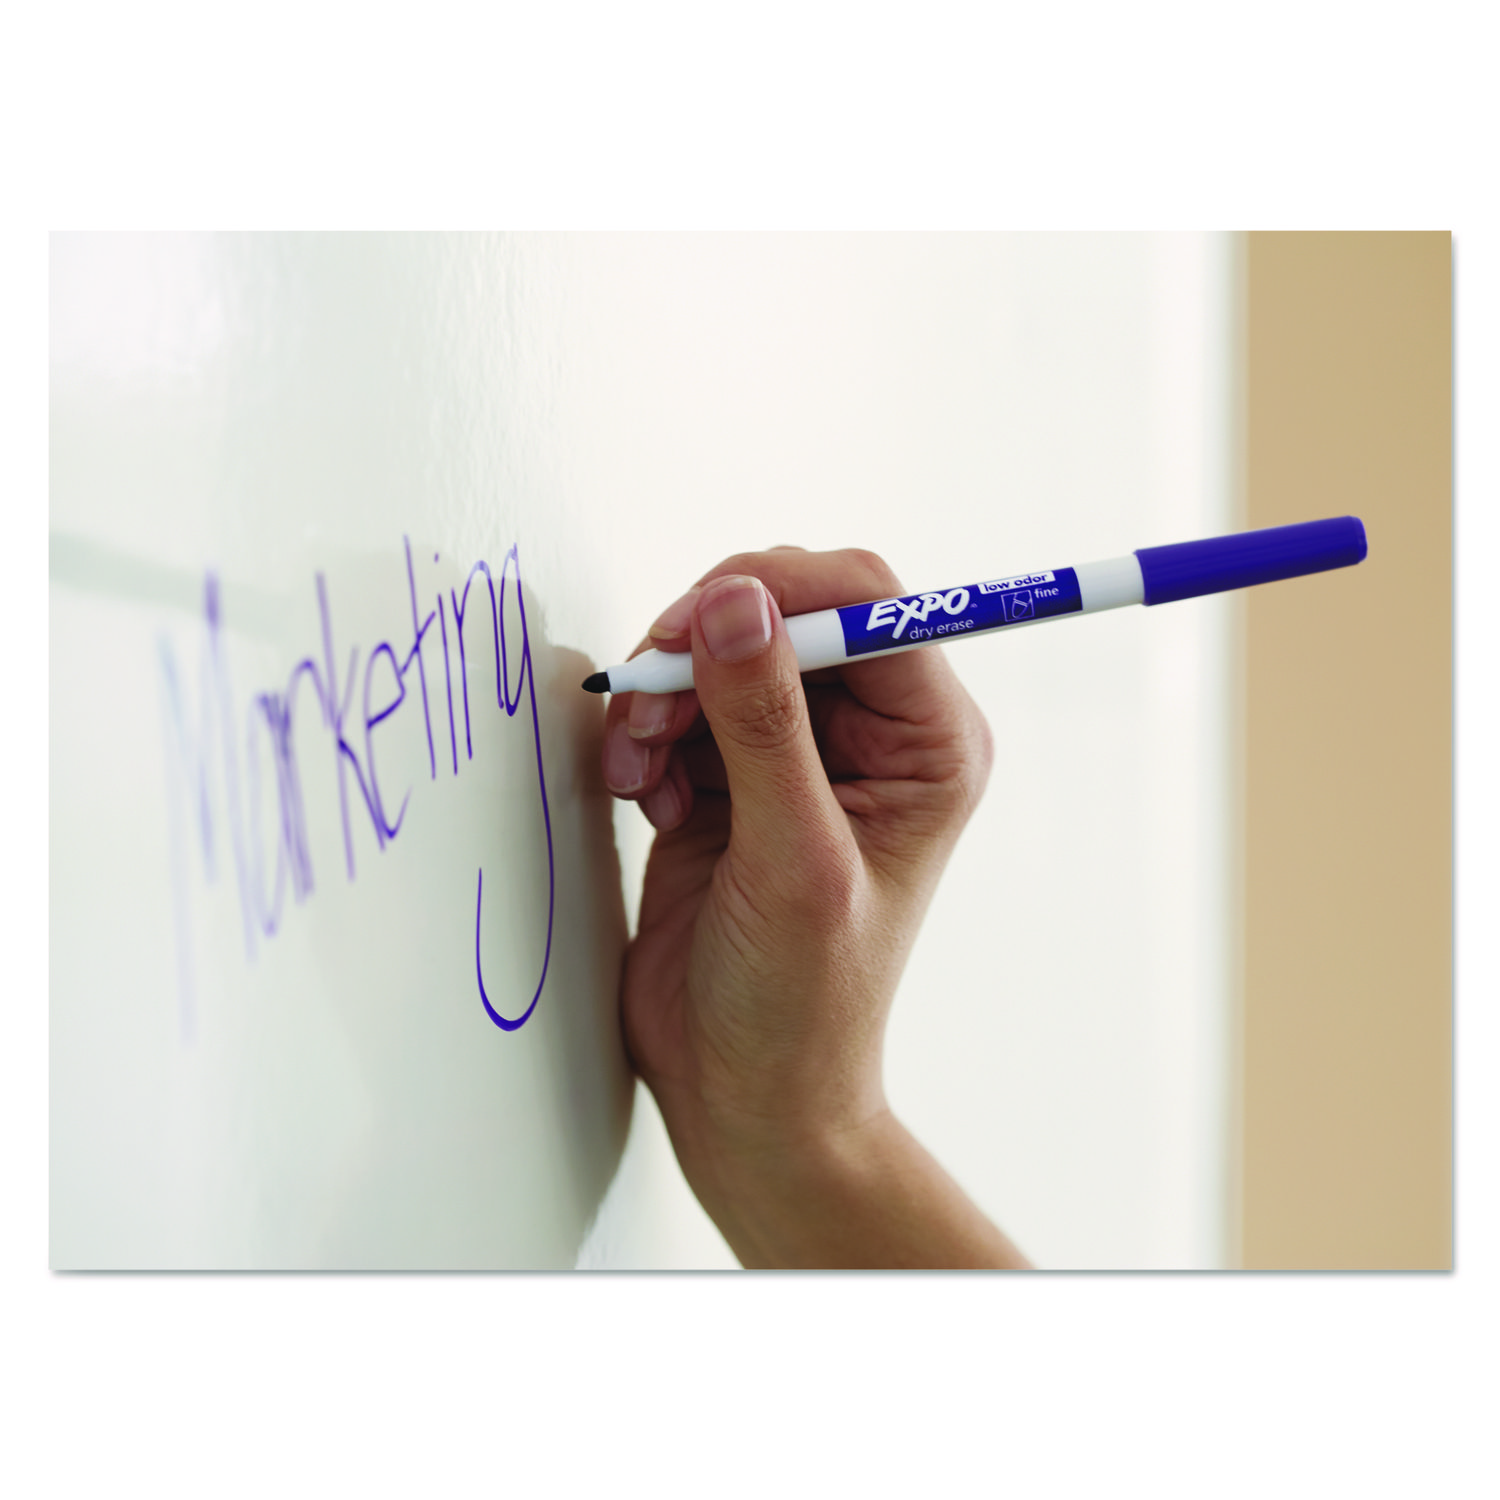 Promotional Low Odor Bullet Tip Dry Erase Markers - USA Made $0.65